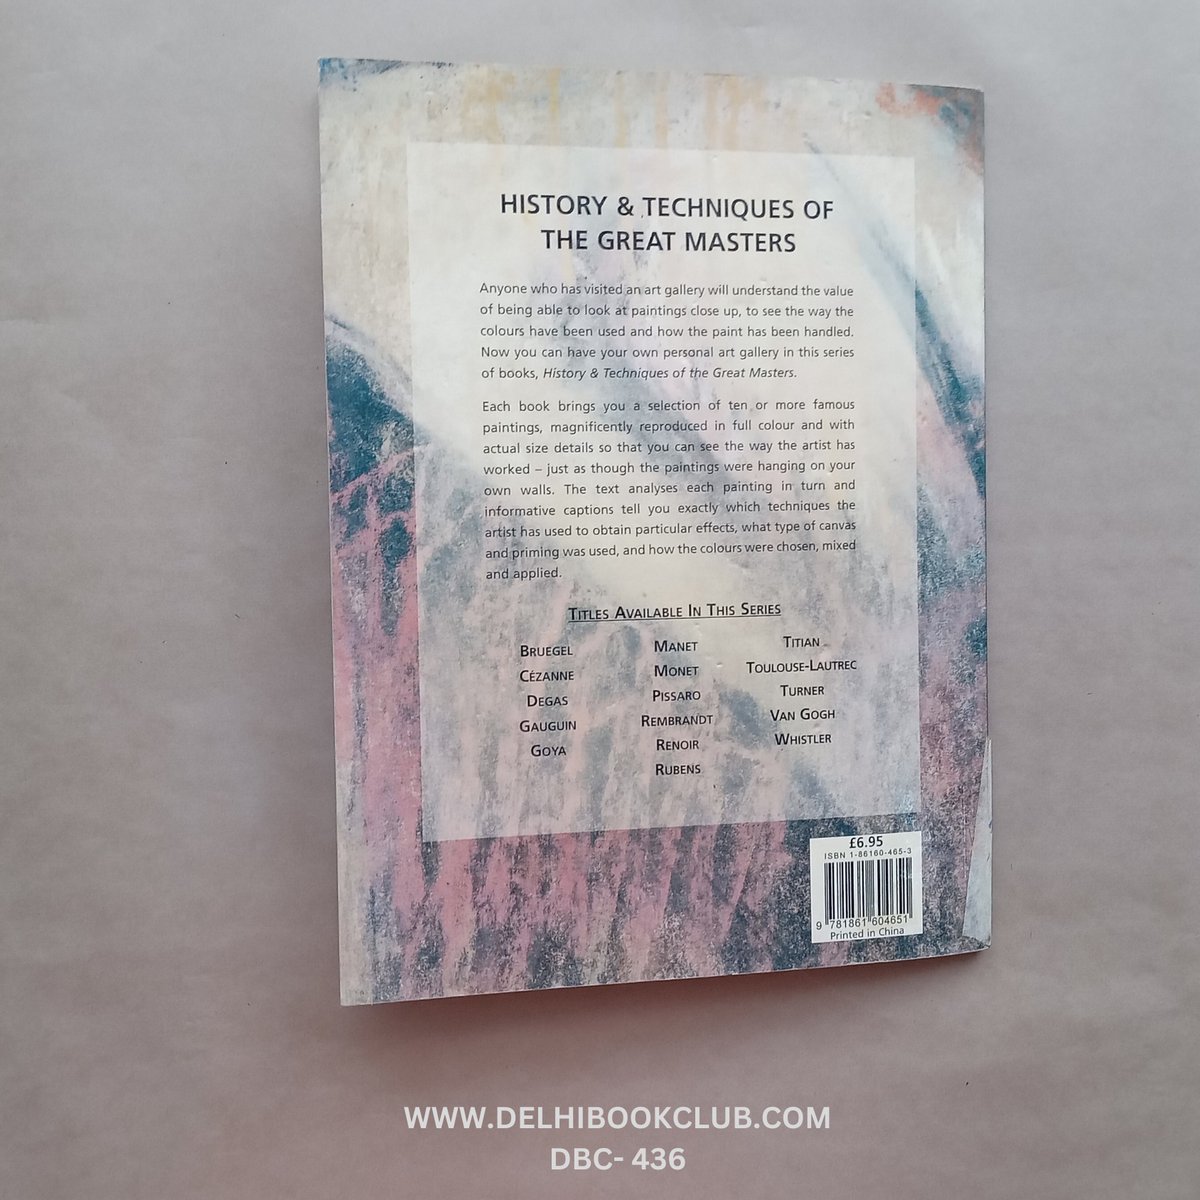 ISBN NO :-  1861604653
Book Name :-History & techniques of the great masters degas
Author Name :- Linda bolton
Publisher :- Eagle editions

DELHI BOOK CLUB
#delhibookclub 
#degas
#Historytechniquesofthegreatmasters #Lindabolton #Year2002 #Eagleeditions #Firstedition #Art  #books